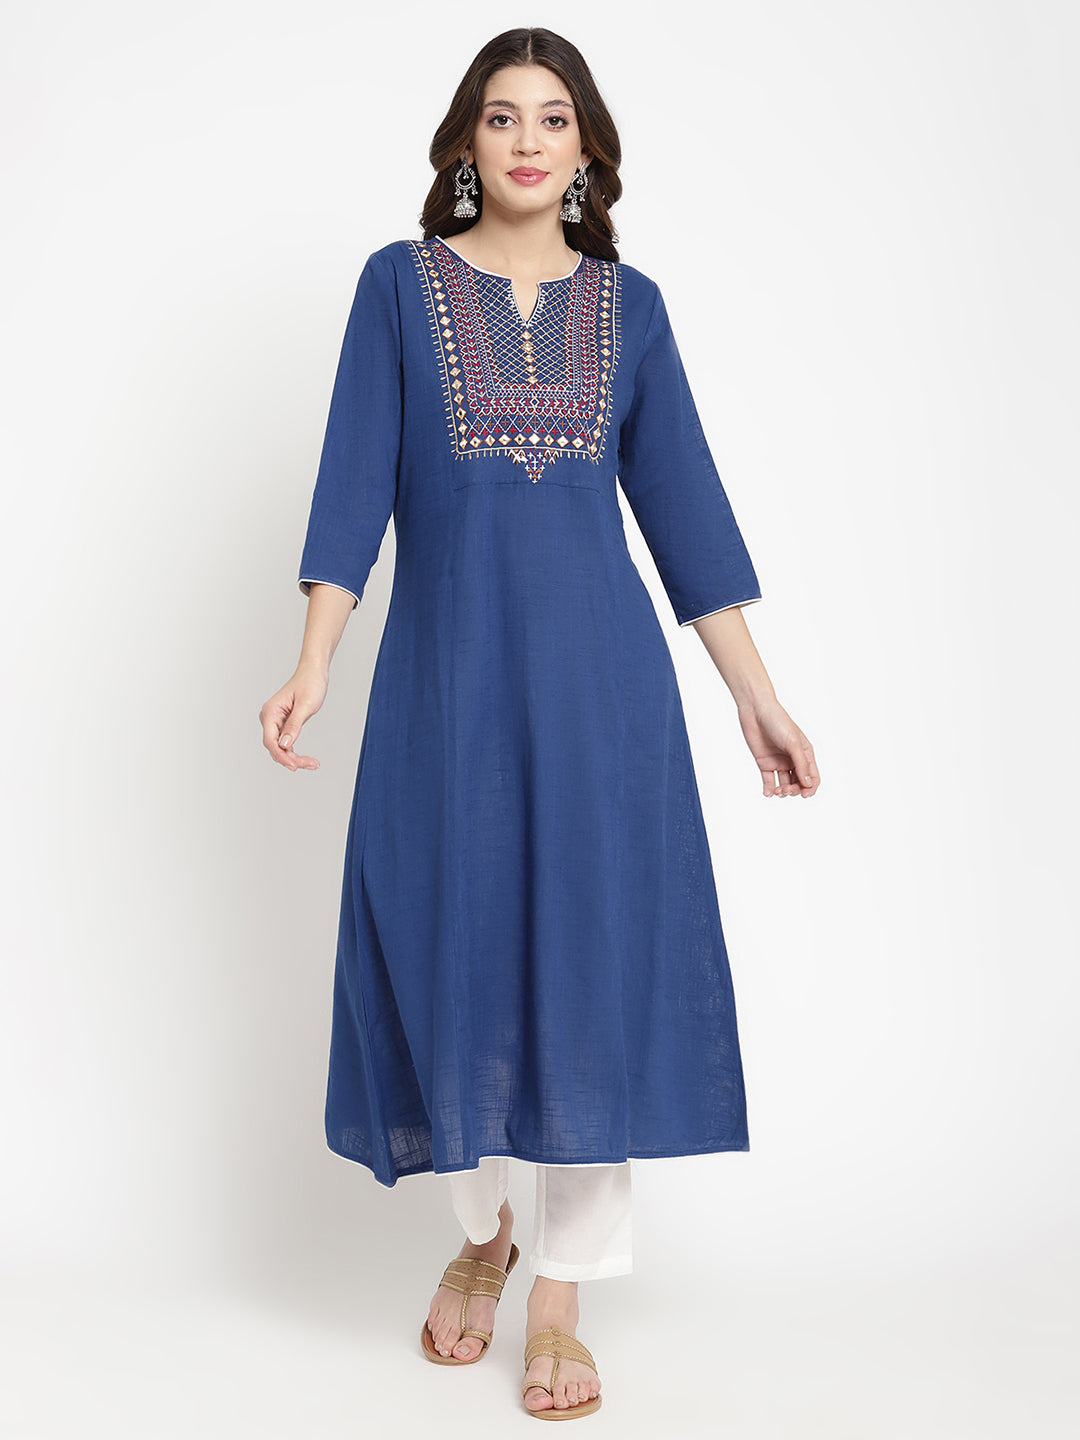 Woman posing in a blue embroidered Kurta by Savi. 